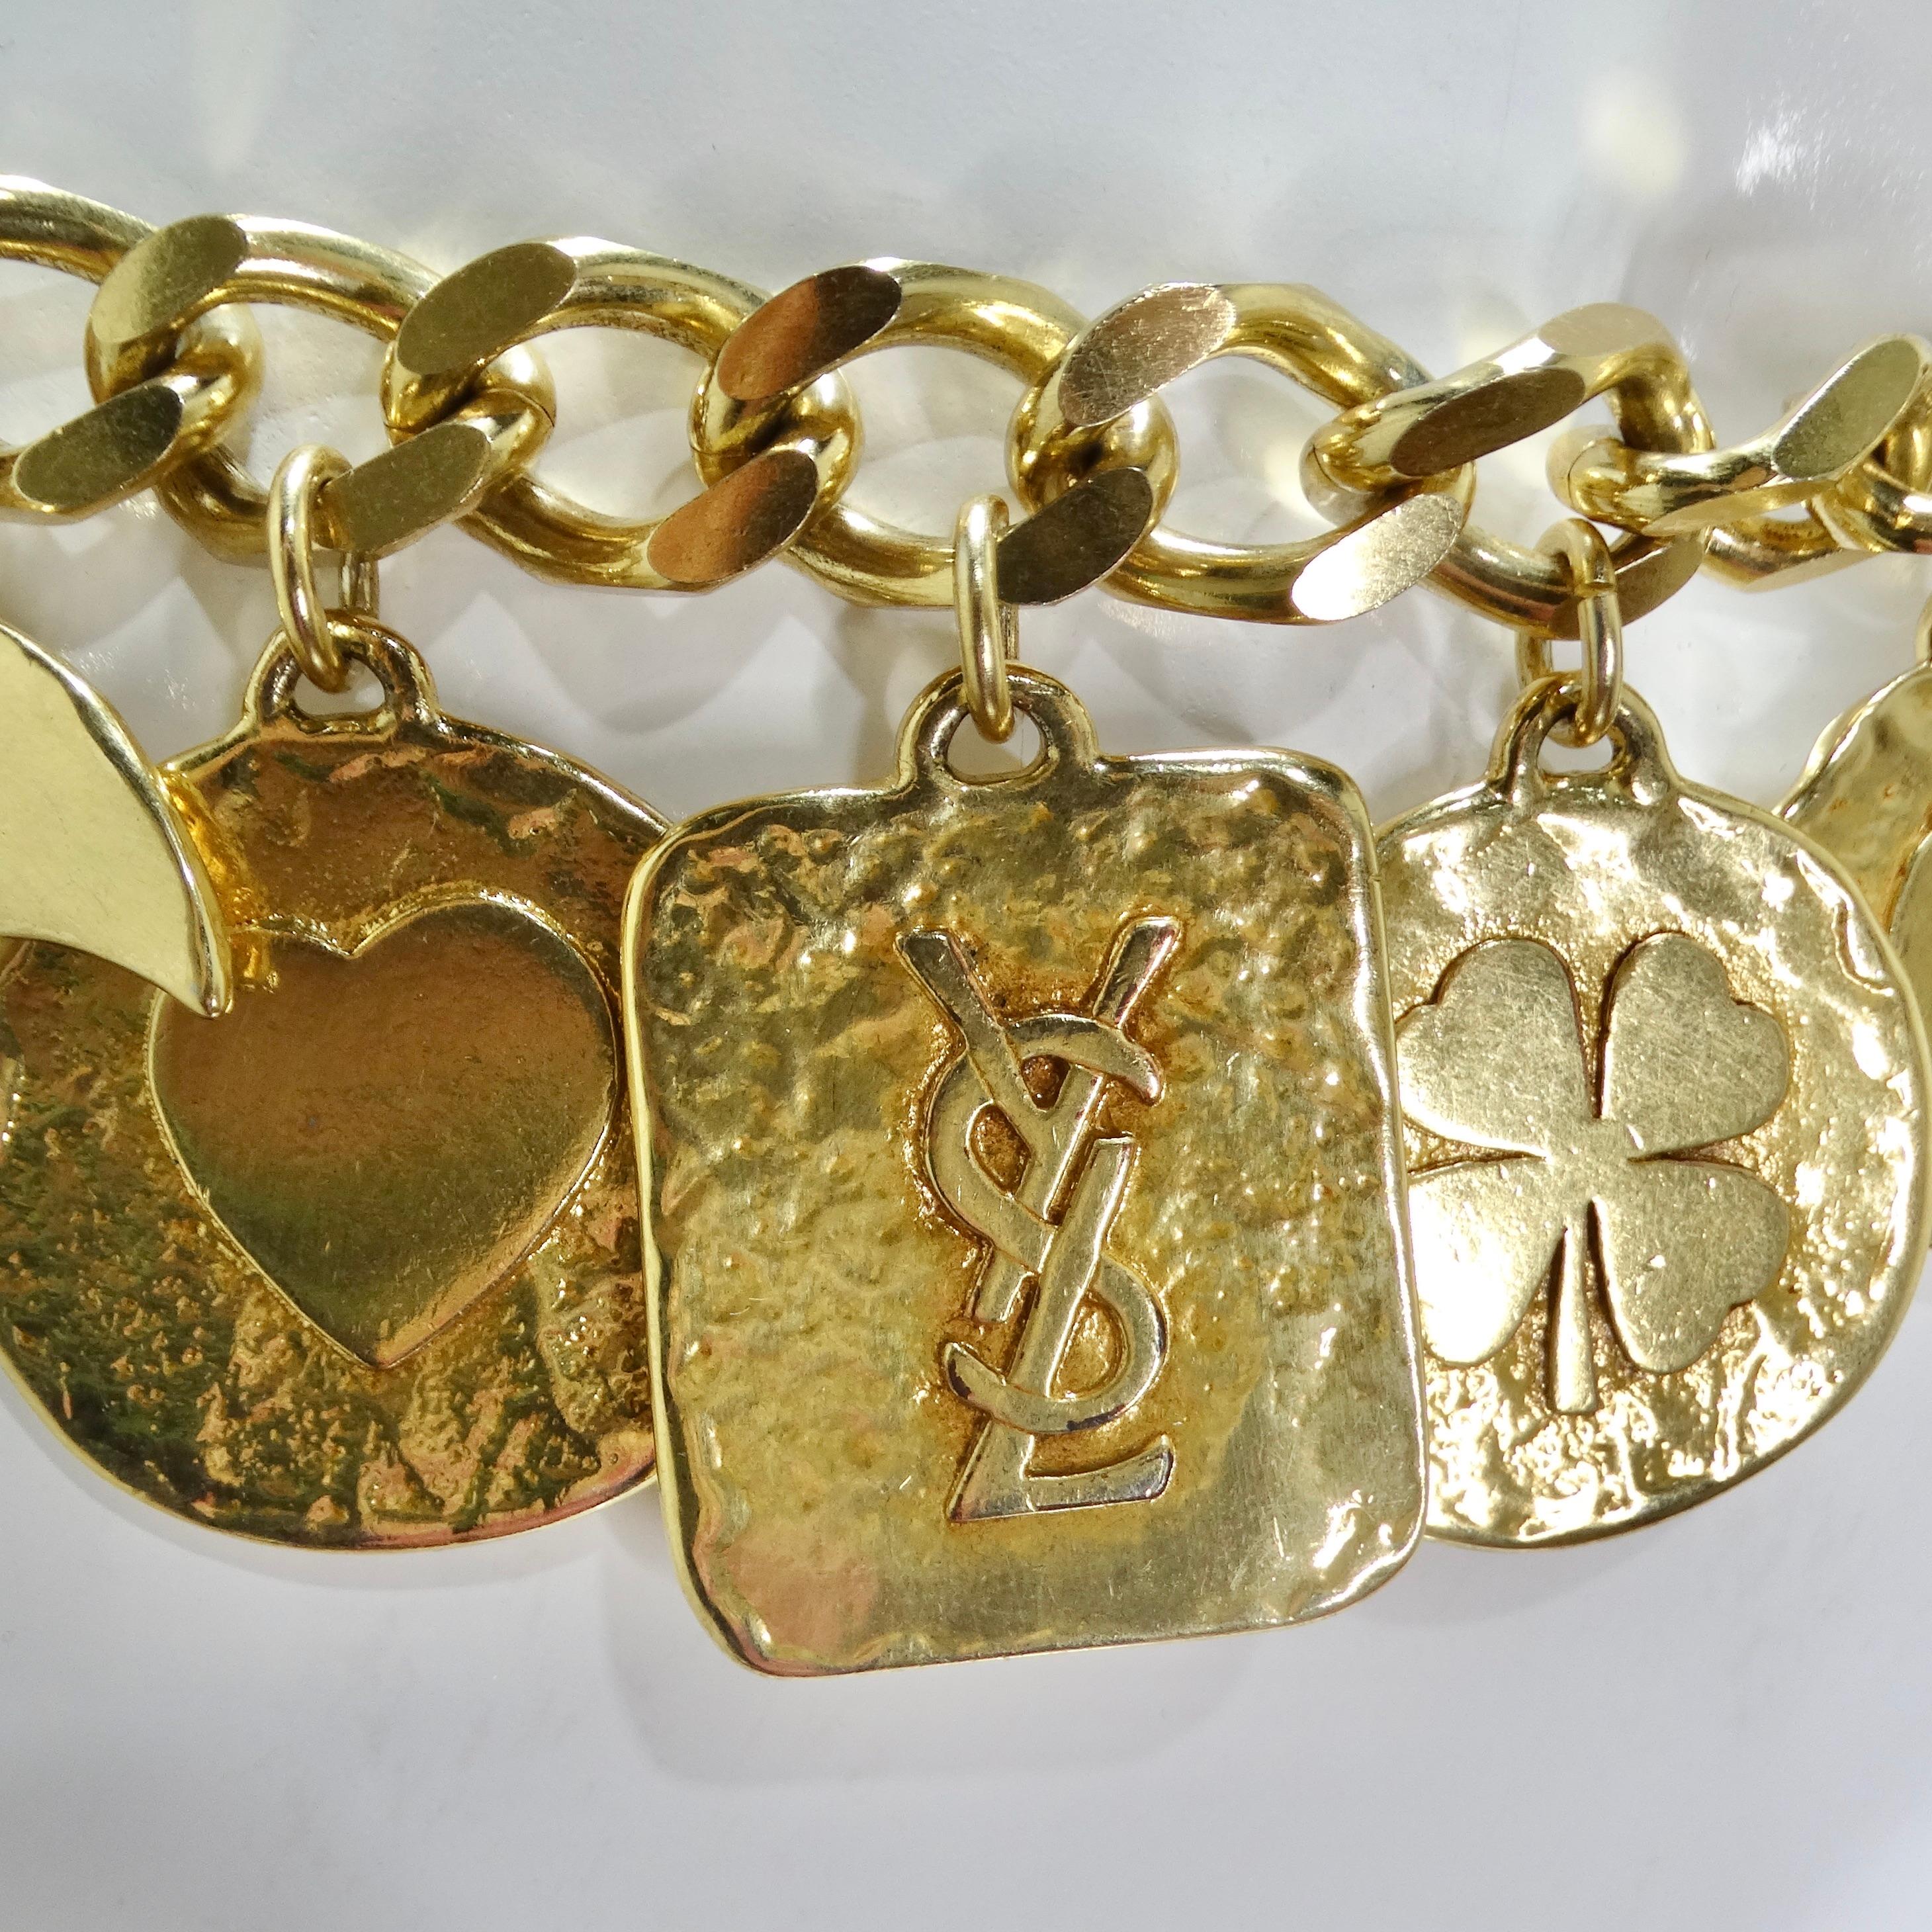 Introducing the Yves Saint Laurent 1990s Gold Tone Charm Chain Belt – a rare and exquisite piece designed by the iconic Yves Saint Laurent in the early 1990s. This fabulous belt is a true collector's item, boasting a timeless design that exudes